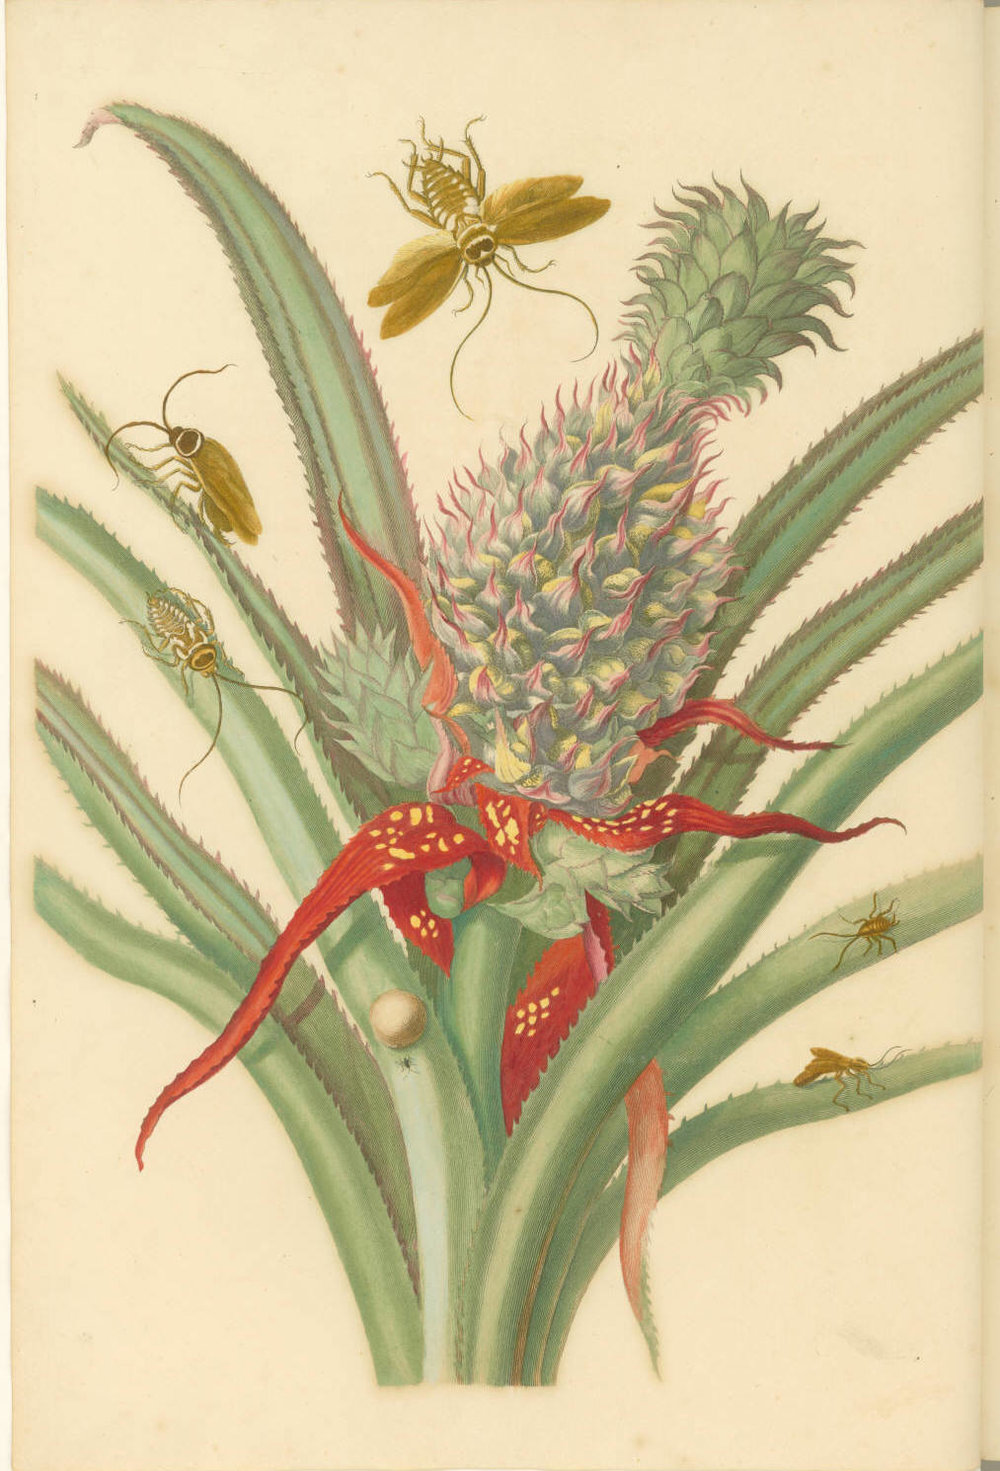  Maria Sibylla Merian.  Ananas , 1719. Engraving with etching and hand-coloring. Printed in  Metamorphosis insectorum Surinamensium.  Plate 1. Second Dutch Edition by Joannes Oosterwyk. Courtesy of the John Carter Brown Library at Brown University. 